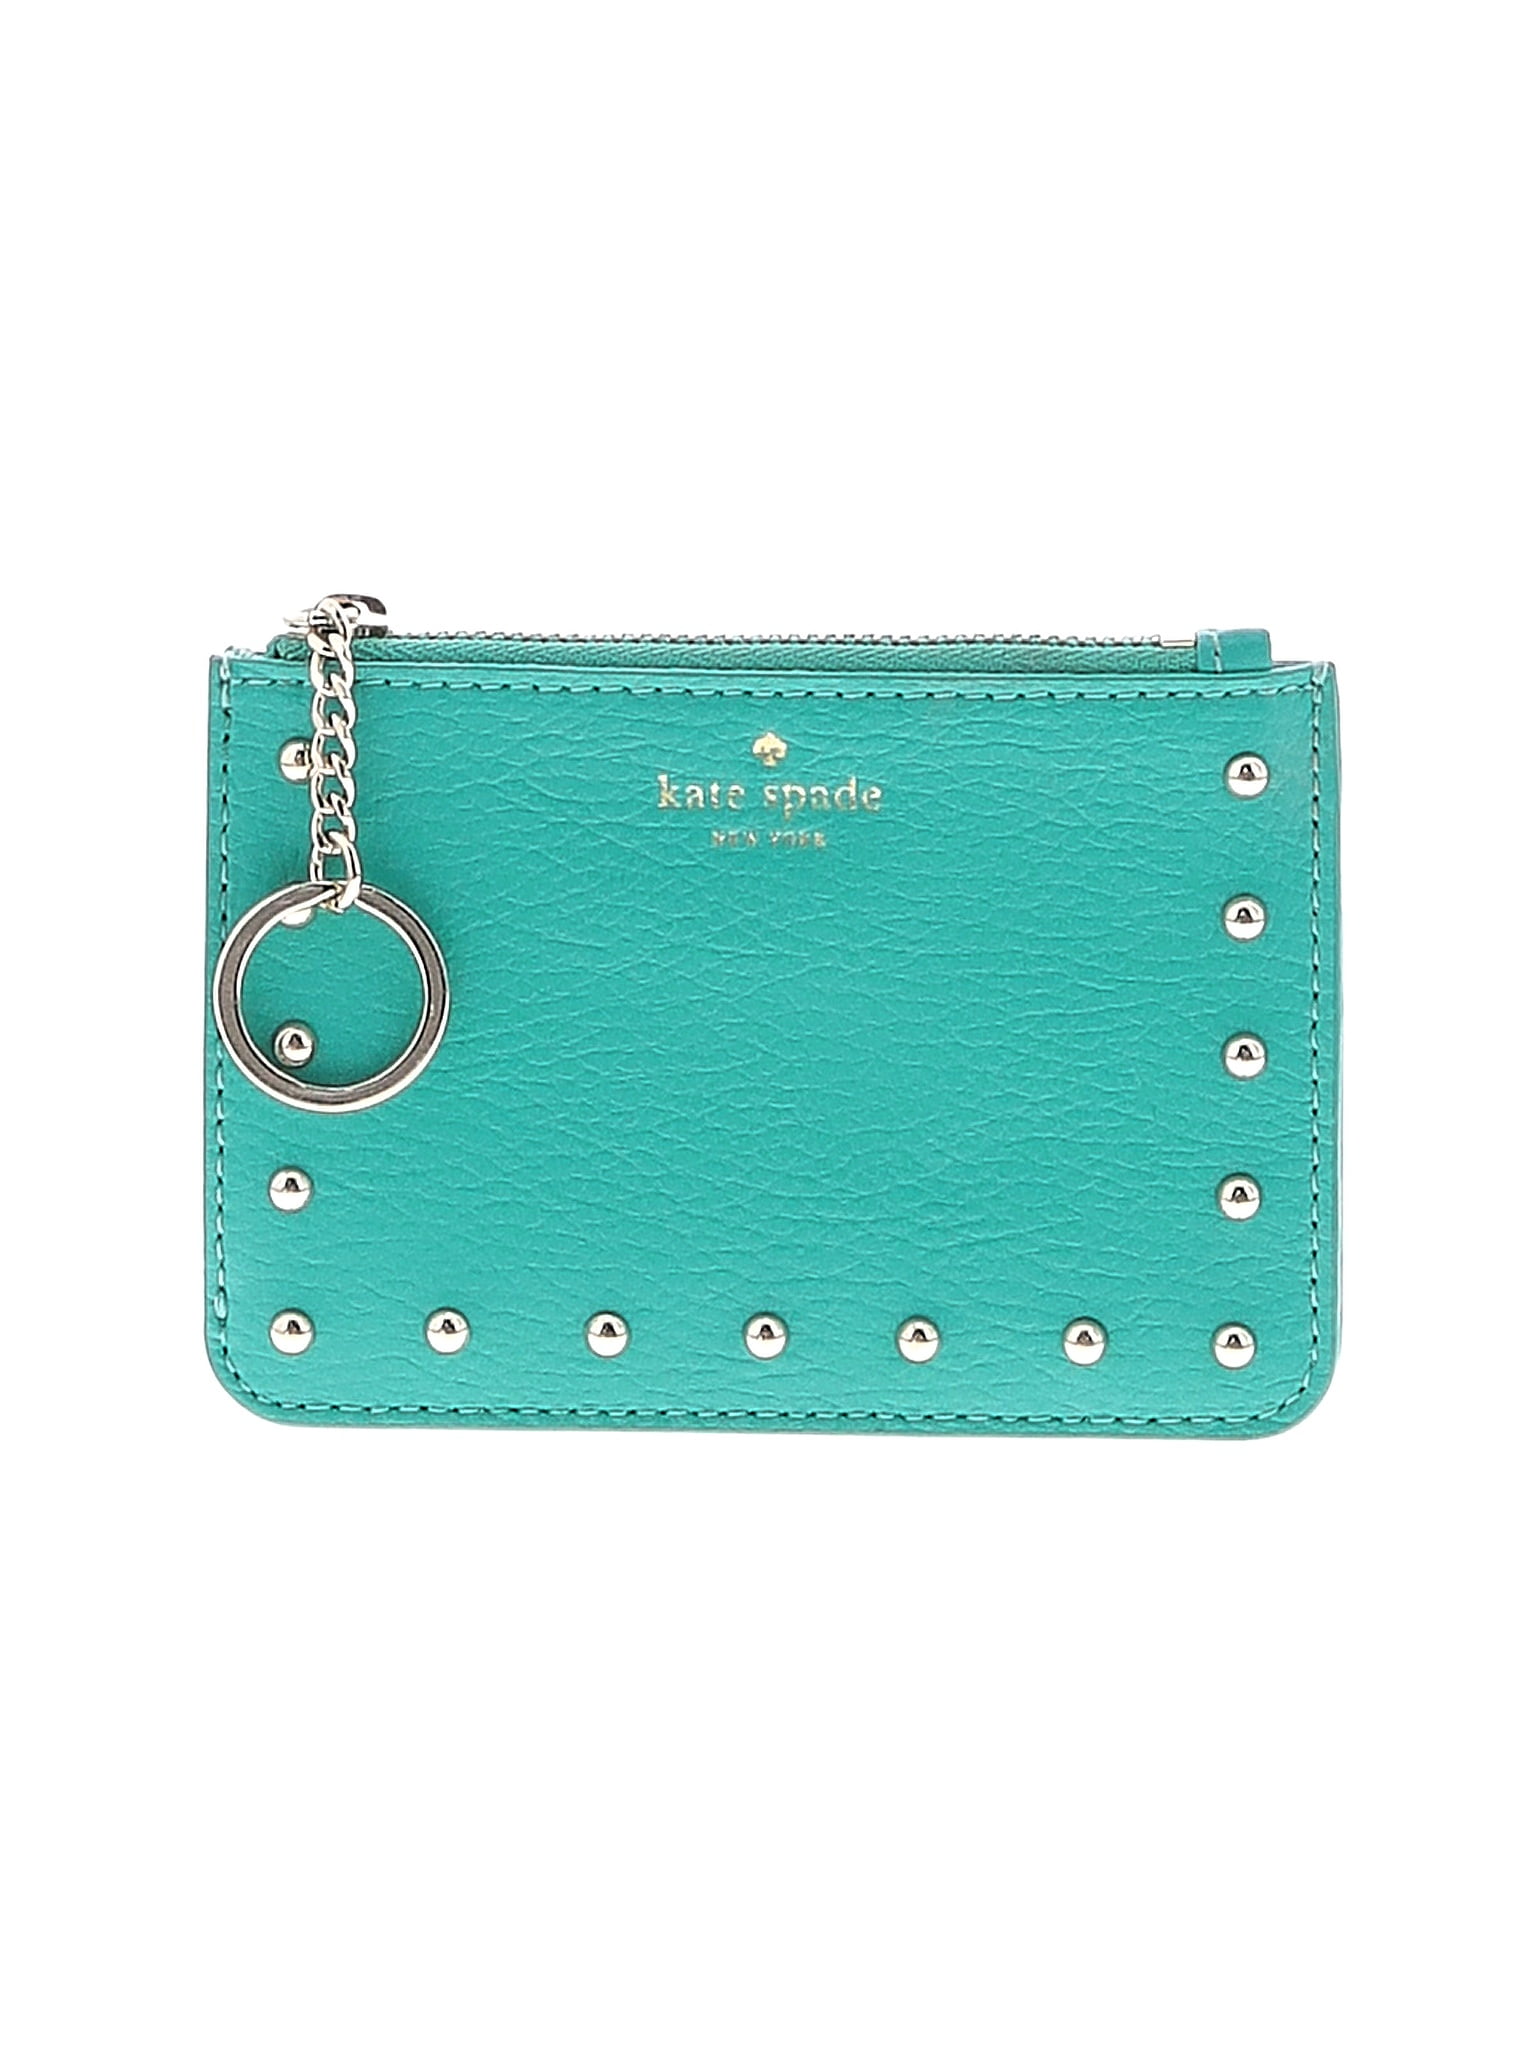 Kate Spade New York 100% Leather Solid Blue Teal Leather Card Holder ...